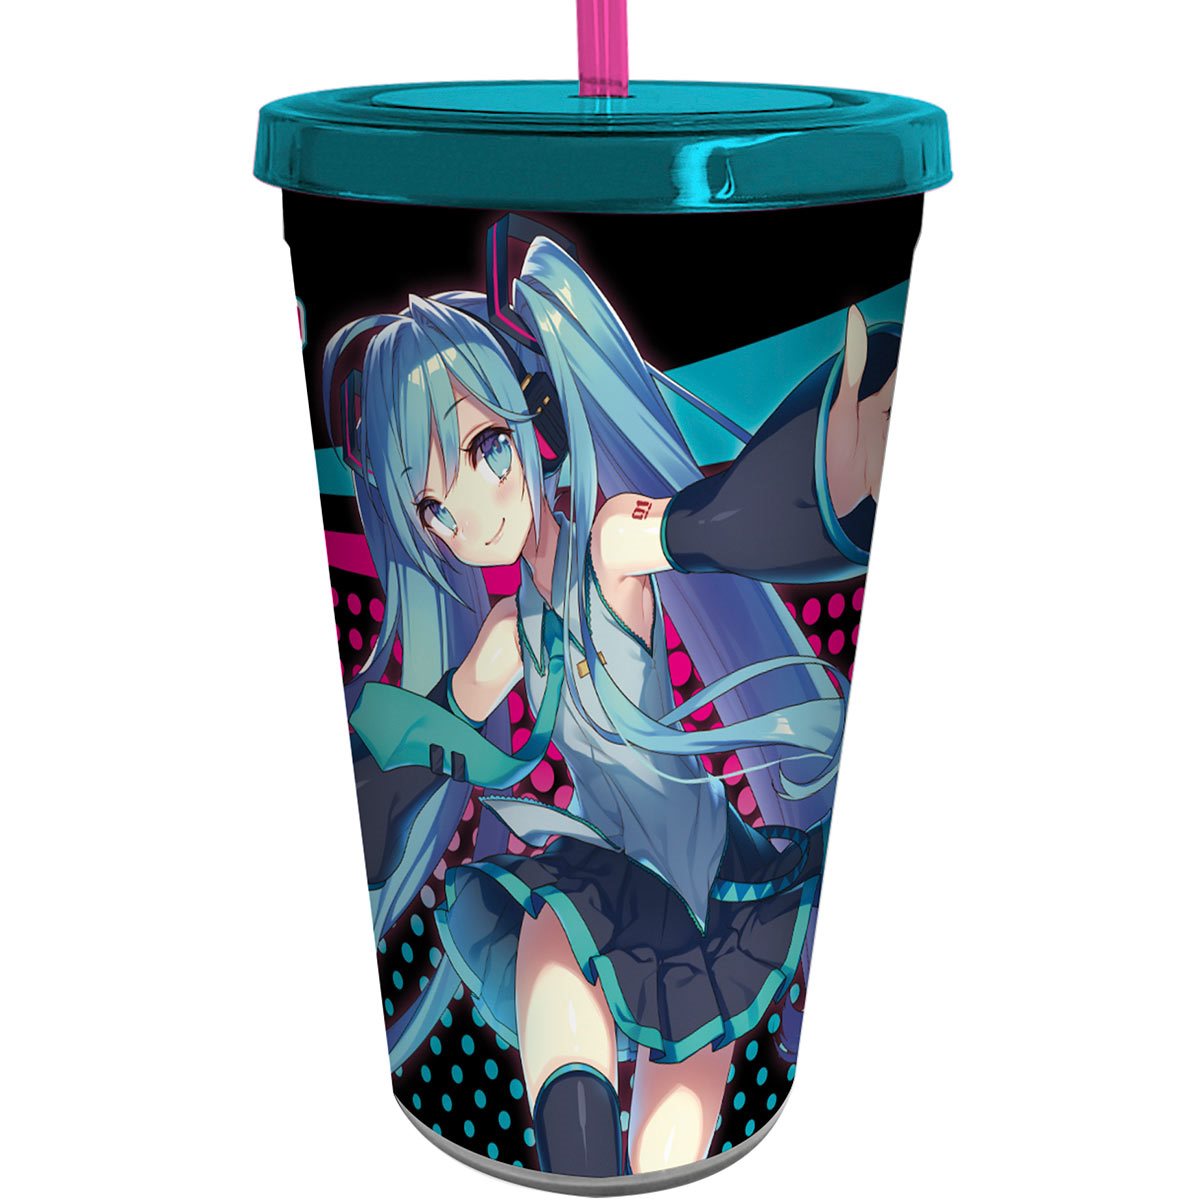 Project Diva Vocaloid Hatsune Miku Trading Cell Phone Strap Track 02 Box of 10 